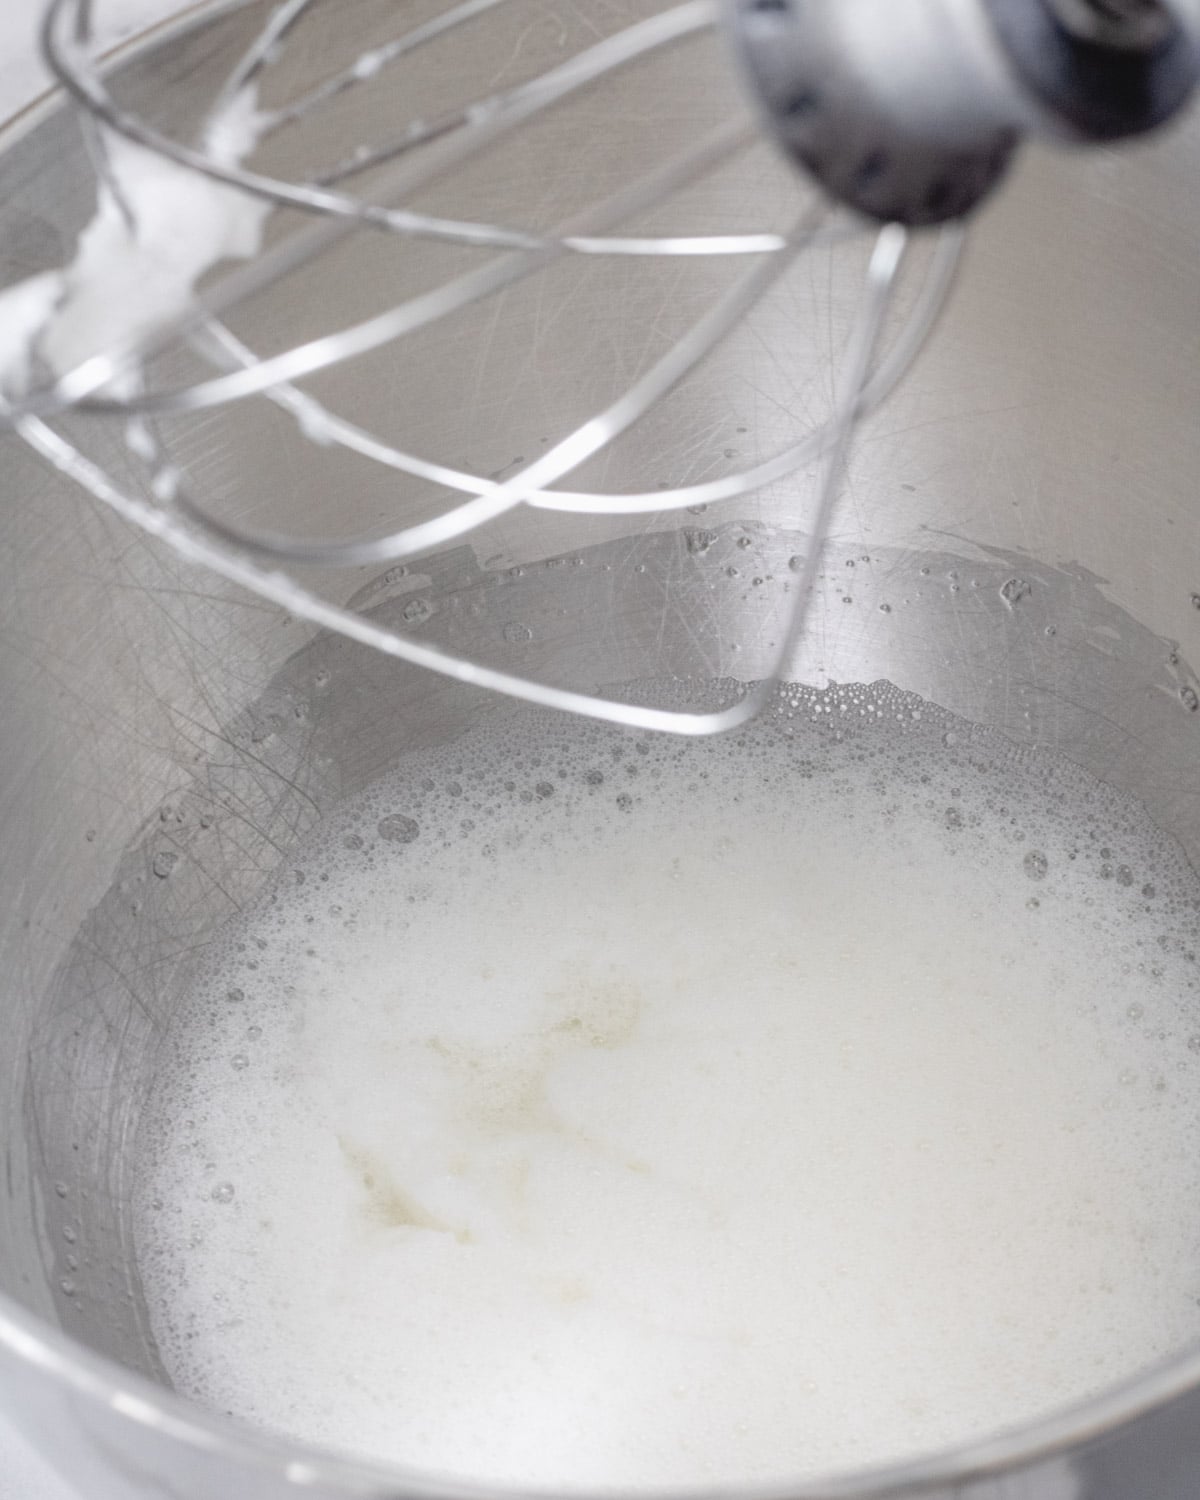 Large bowl with frothy egg whites, and whisk beater at the top.